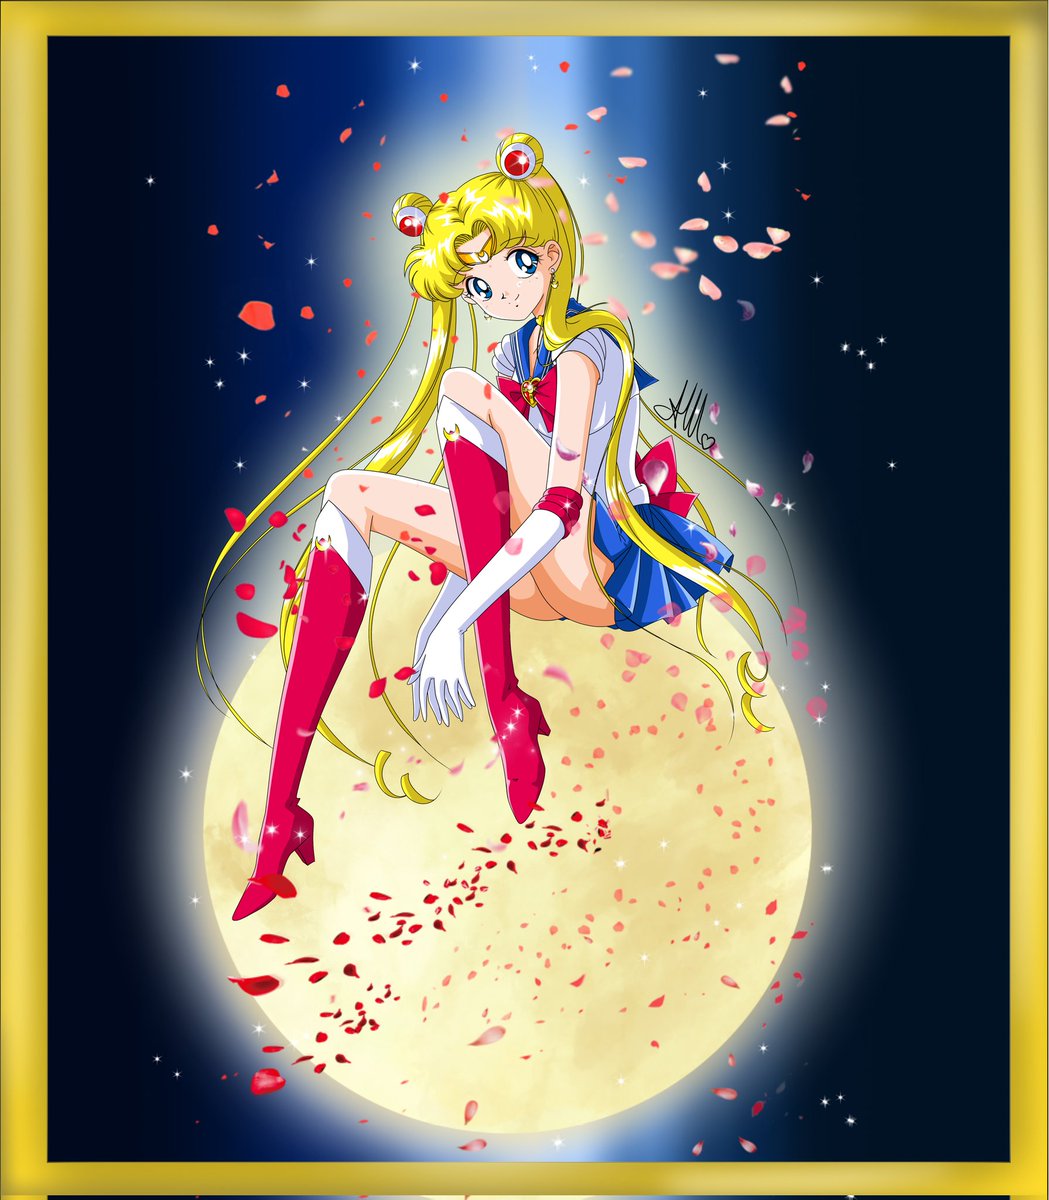 🌙inspired by the lighting for the promotion of the film #sailormooneternal where the warriors are sitting on their planets. I think I'll continue. ✍️💪#ikukoitoh #sailormoon #naokotakeuchi #supersailormoon #prettyguardiansailormoon #sailormoonsupers #princessserenity #sailor